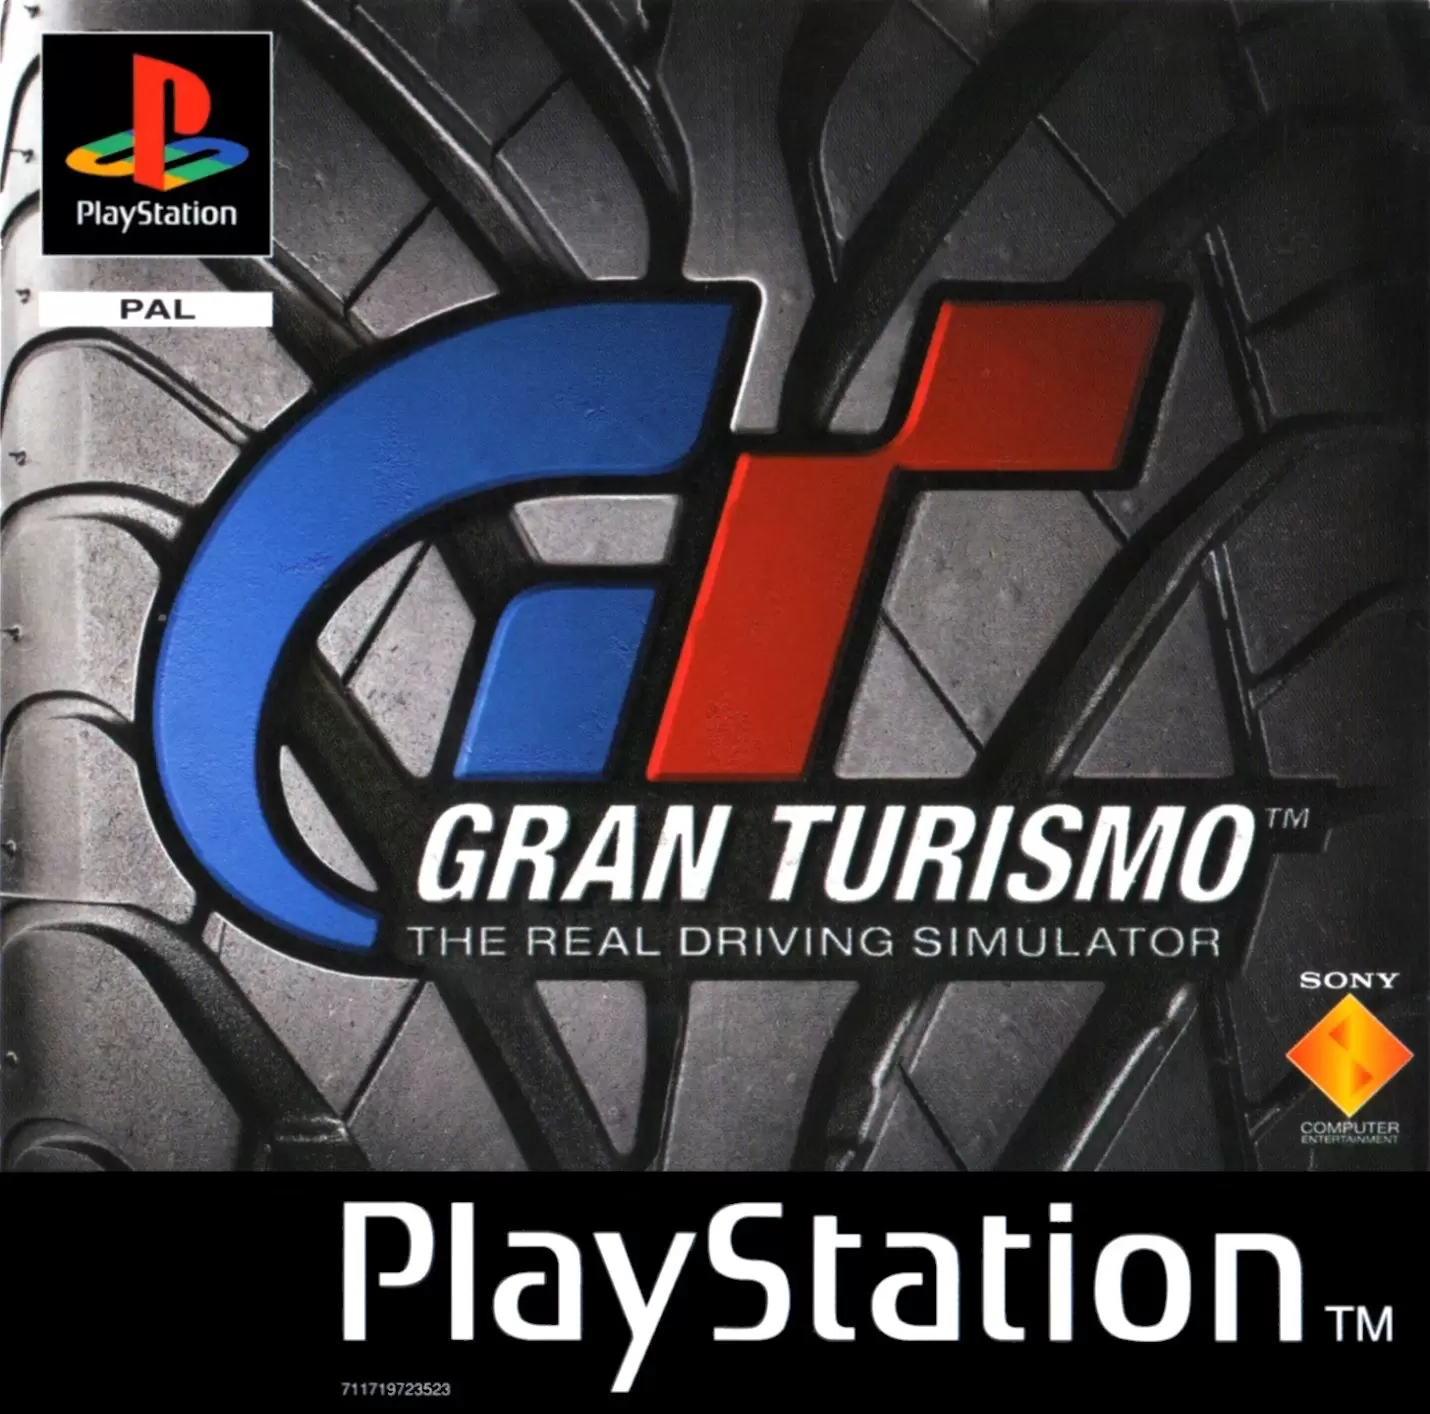 Jeux Playstation PS1 - Gran Turismo (Europe)